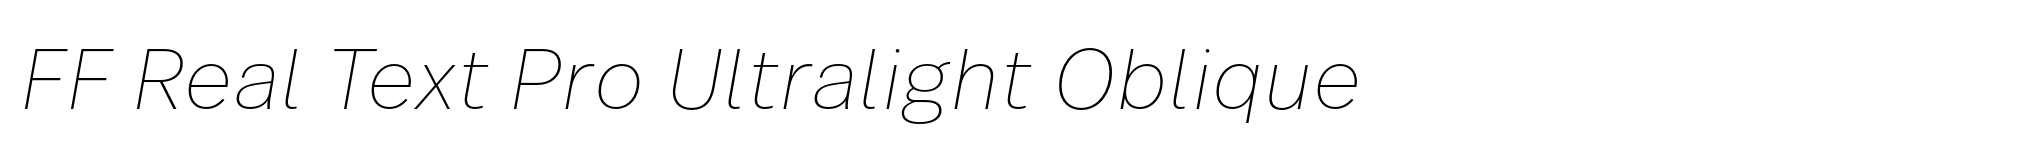 FF Real Text Pro Ultralight Oblique image